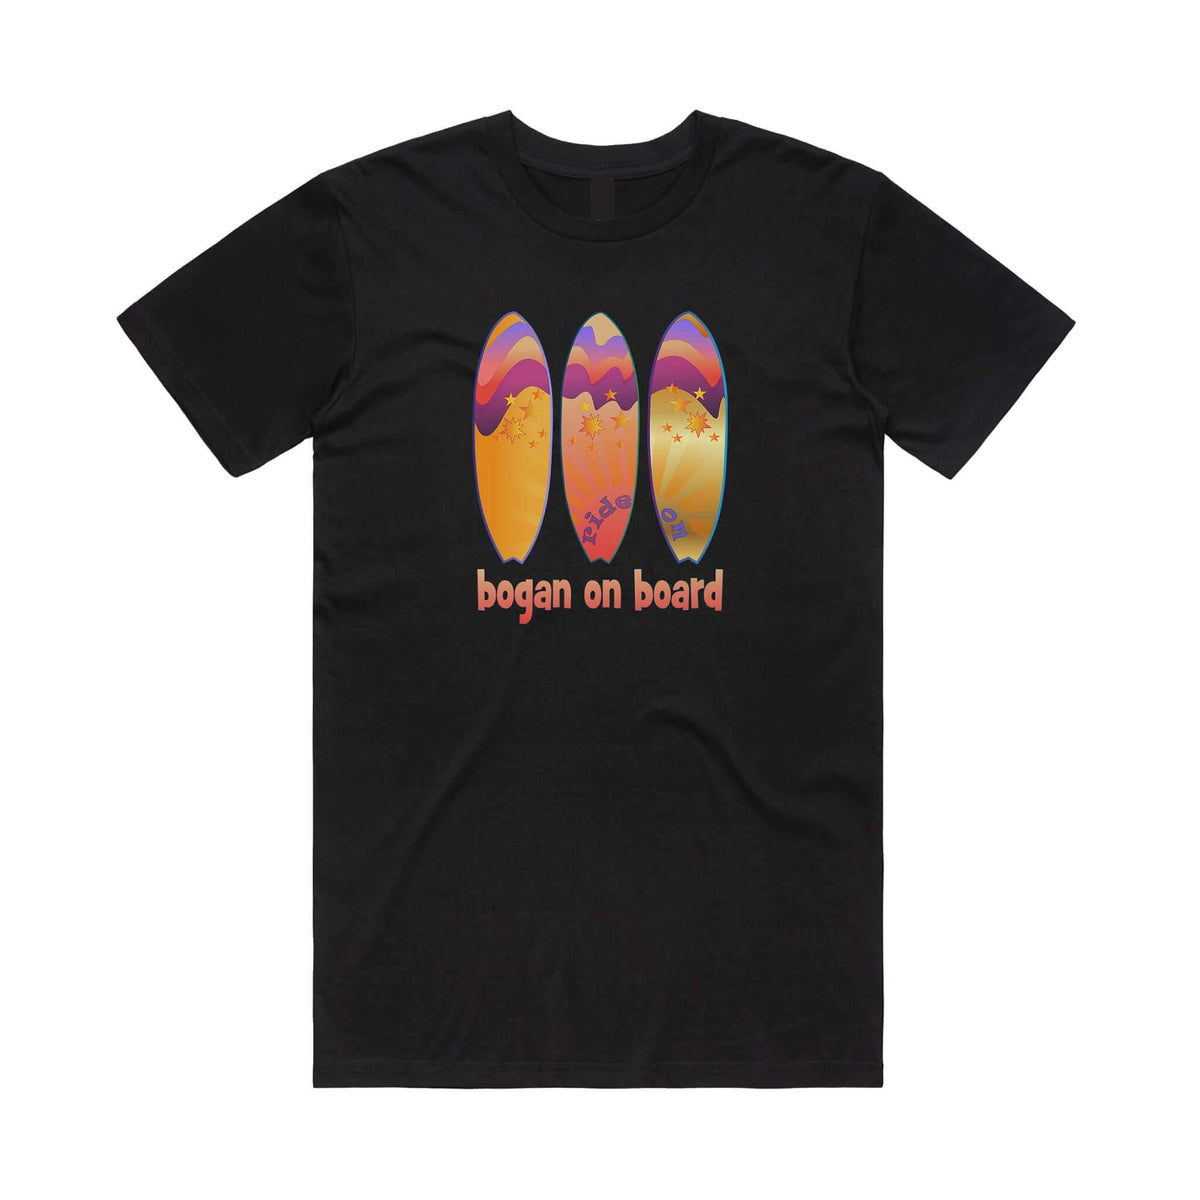 Black t shirt with bright Bogan on Board graphic surf design